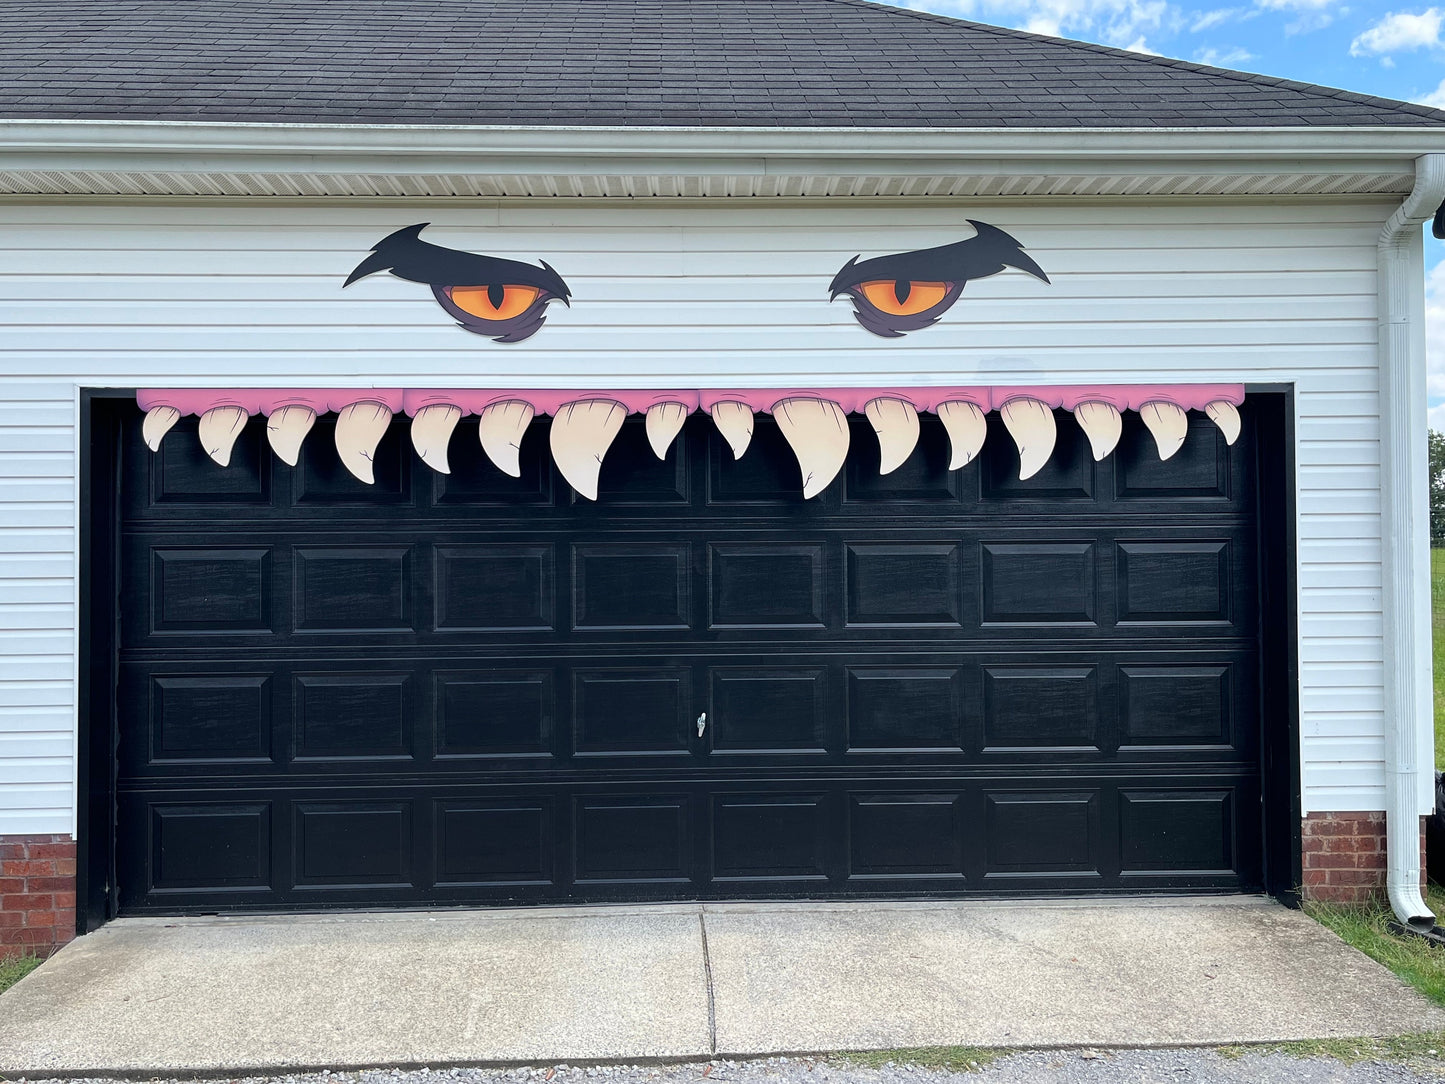 HUGE Monster Garage House Eyes and Teeth Decoration Vibrant colors sturdy PVC